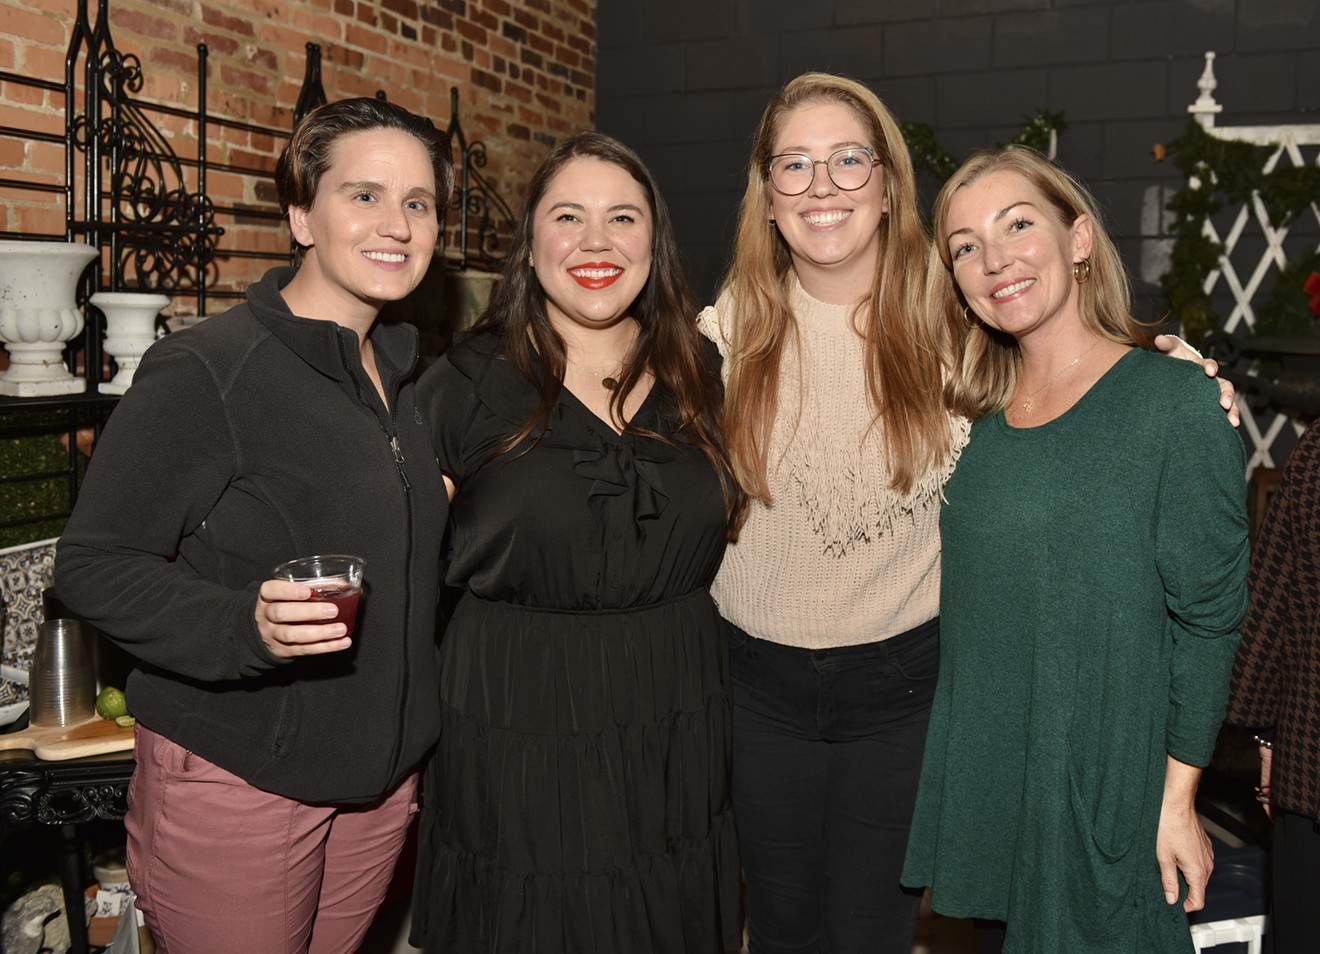 Junior League of Savannah’s Holiday Raffle & Auction event at Courtyard by Chuck Chewning